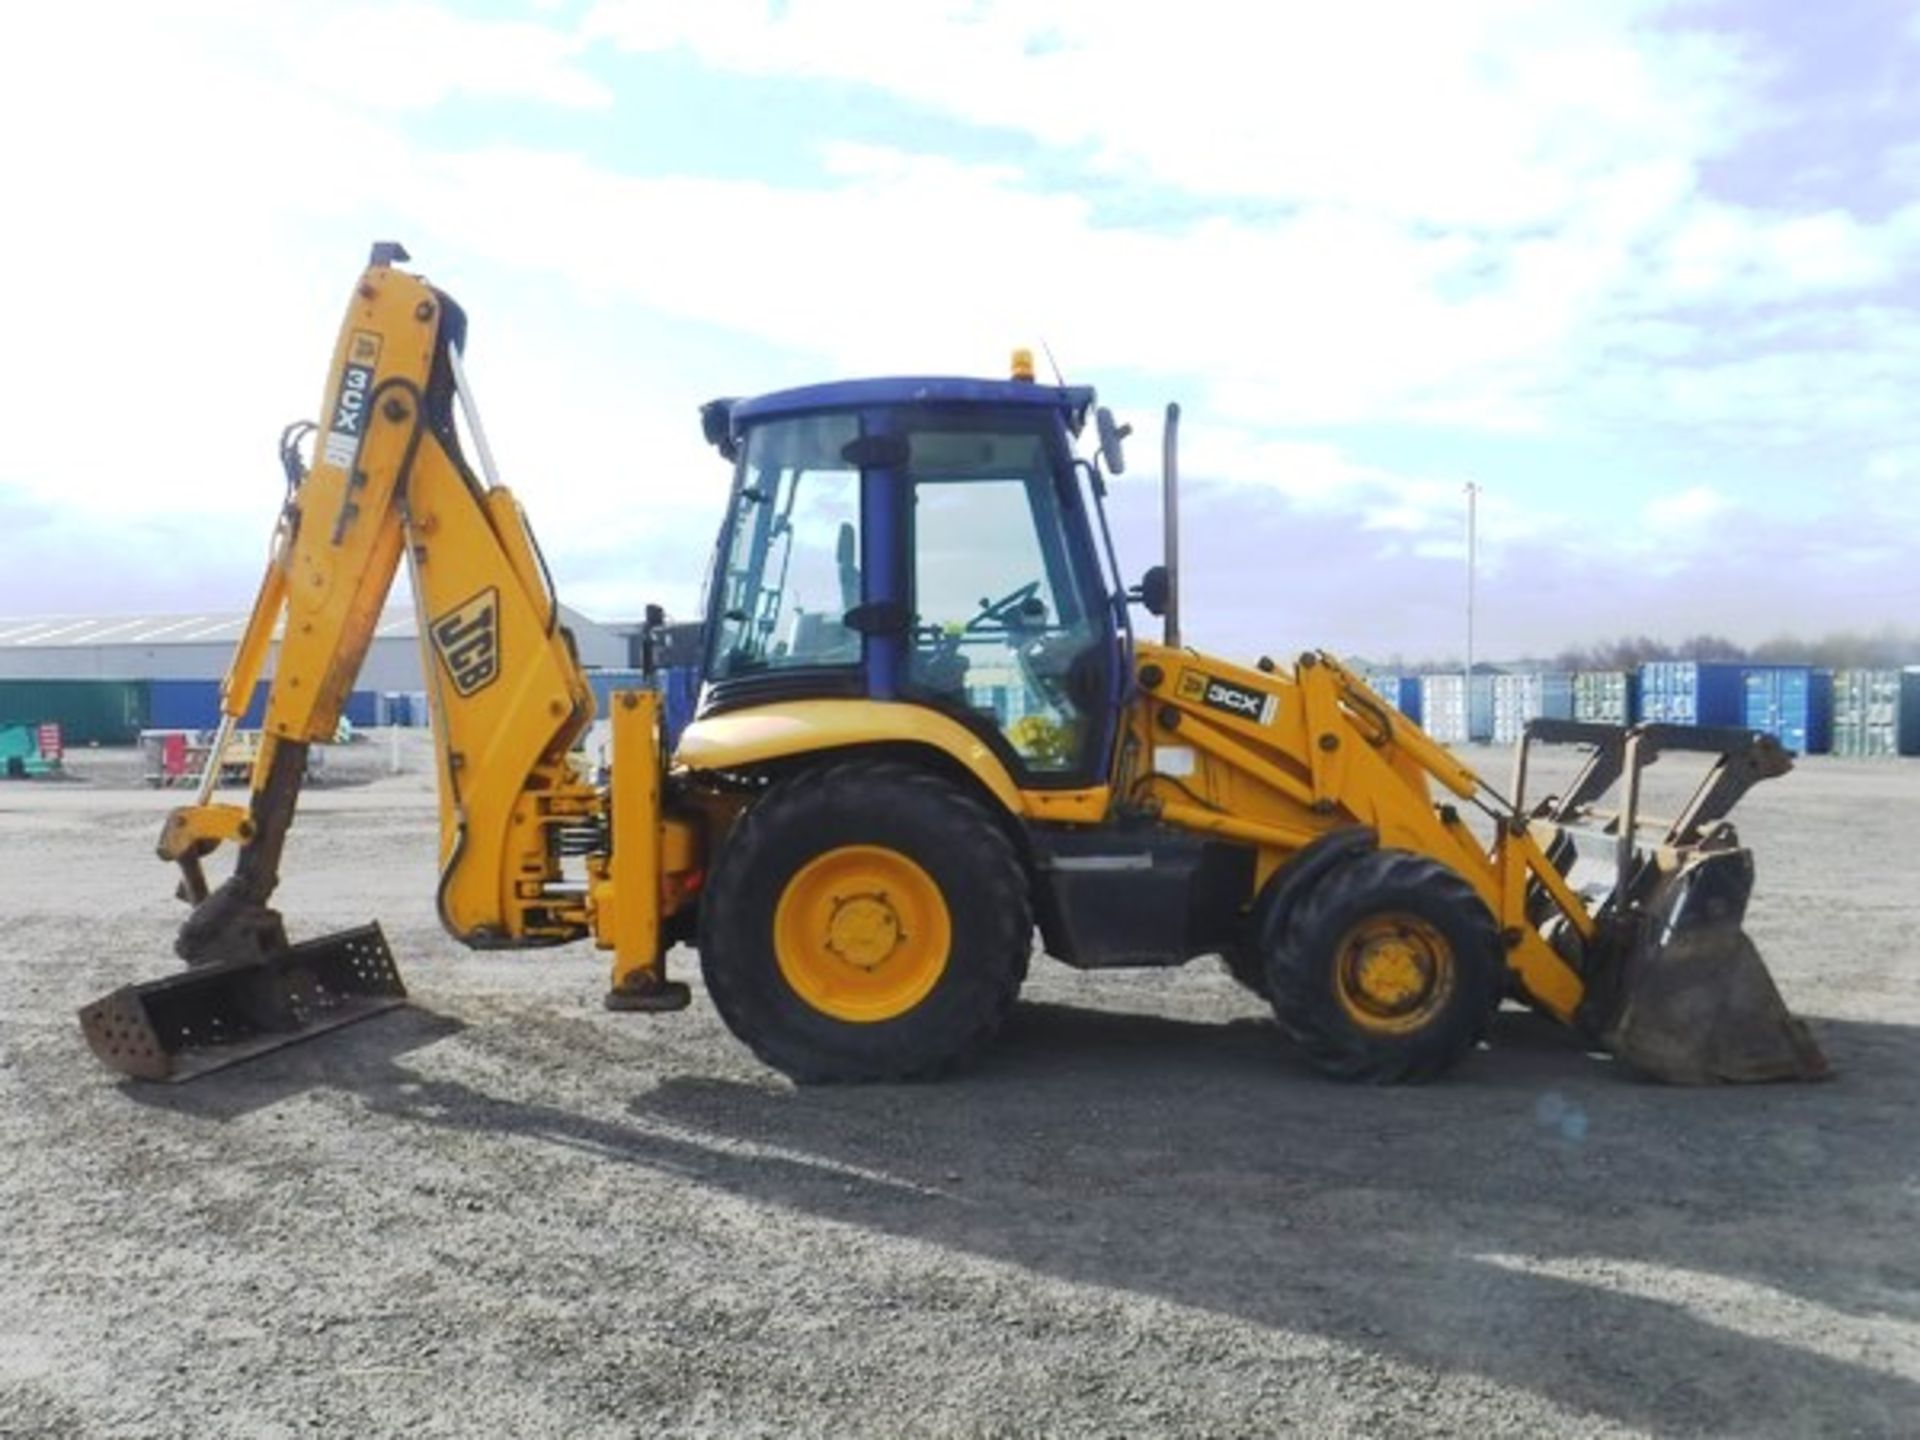 2002 JCB 3CX PLUS DIGGER. REG NO ST52 ODU. SN0934169. GVW (TONNES) 8076. NEW HOUR CLOCK FITTED RECEN - Image 13 of 18